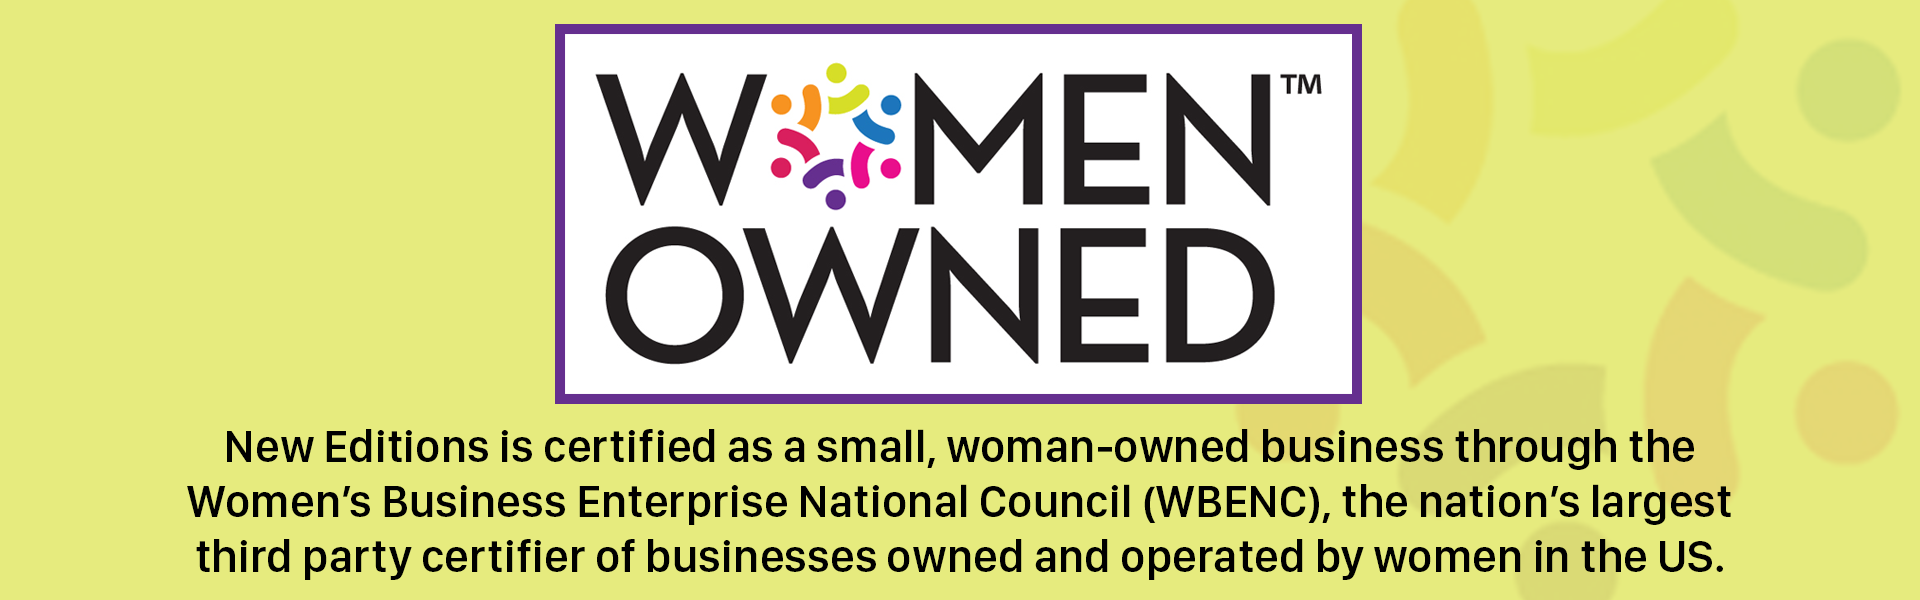 Women Owned! New Editions is certified as a small, woman-owned business through the Women’s Business Enterprise National Council (WBENC), the nation’s largest third party certifier of businesses owned and operated by women in the US.